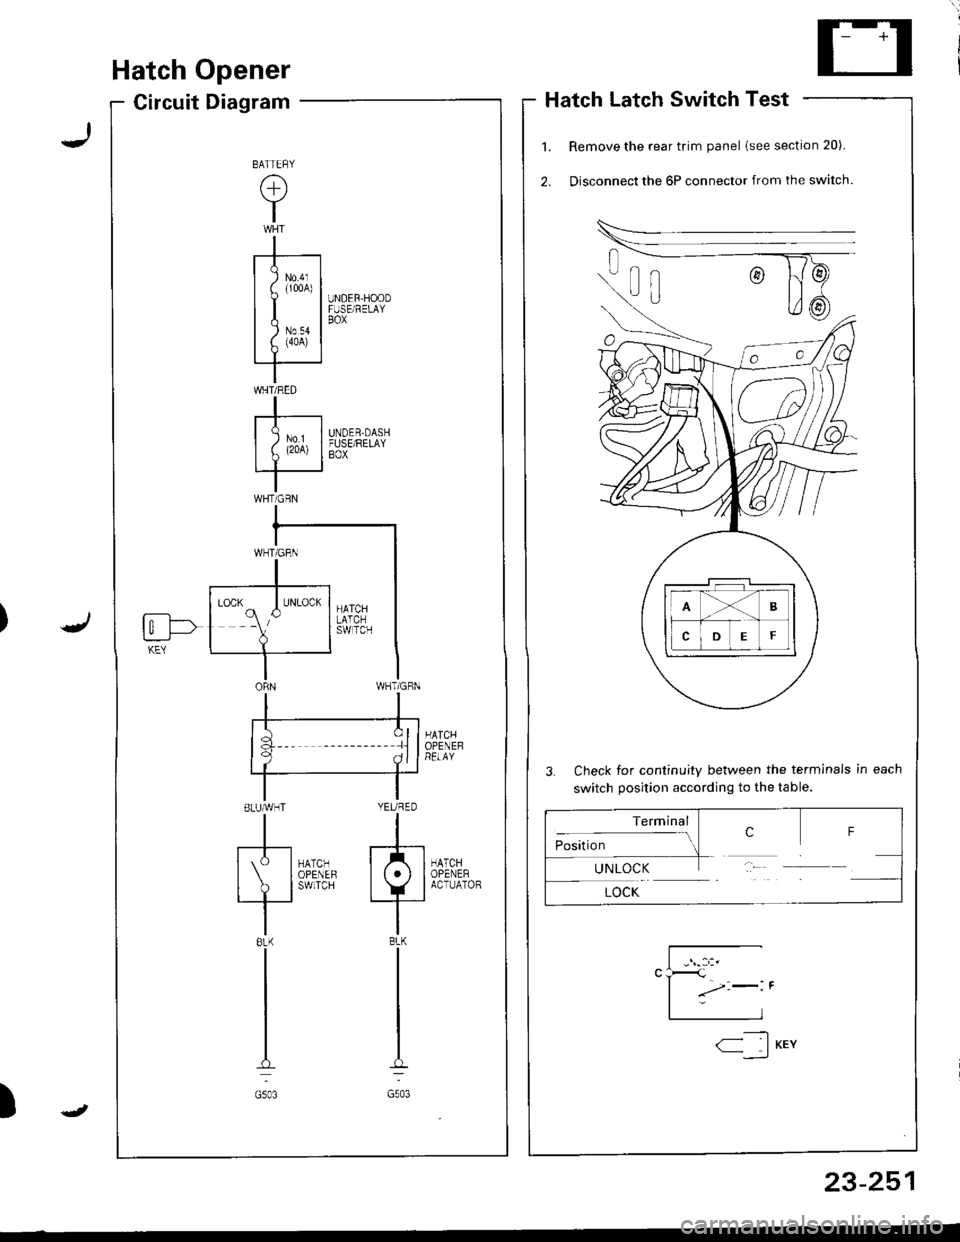 HONDA INTEGRA 1998 4.G Owners Guide Hatch Opener
Circuit DiagramHatch Latch Switch Test
Remove the rear trim panel lsee section 20).
Disconnect the 6P connector from the switch.
3. Check for continuity between the terminals in each
swit